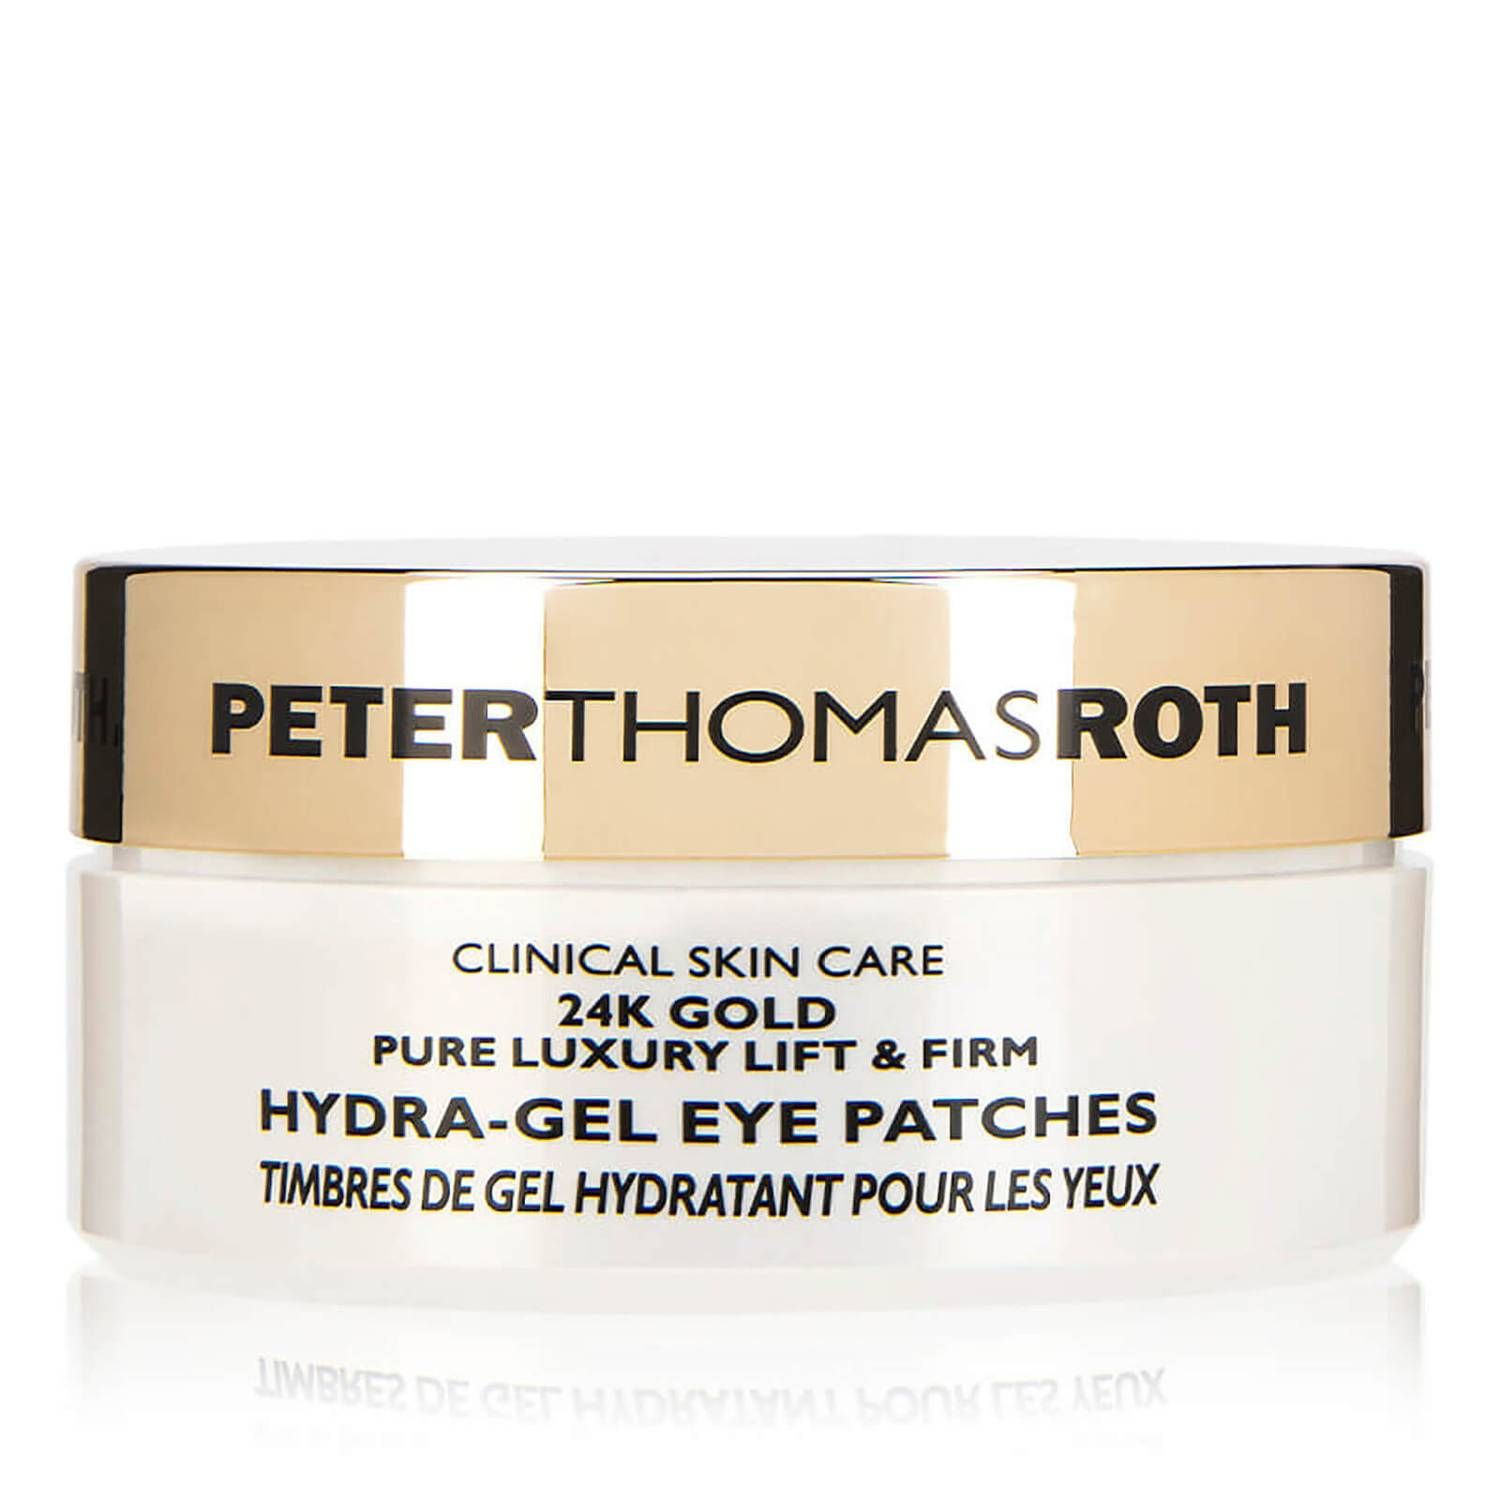 Peter Thomas Roth 24K Gold Pure Luxury Lift and Firm Hydra-Gel Eye Patches (30 pair) | Dermstore